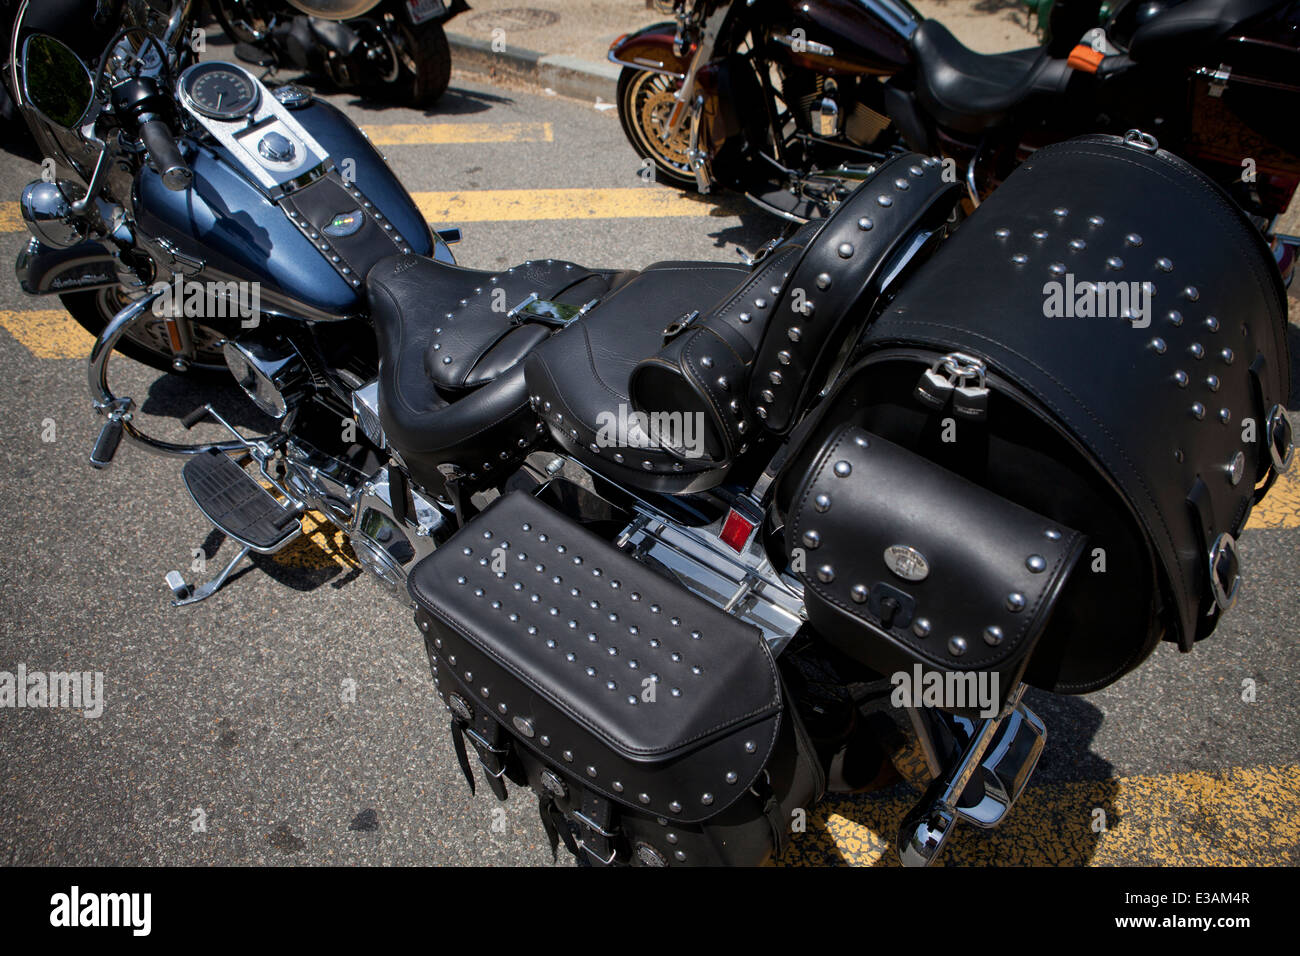 krans Invitere glide Leather saddle and storage accessories on Harley Davidson motorcycle - USA  Stock Photo - Alamy